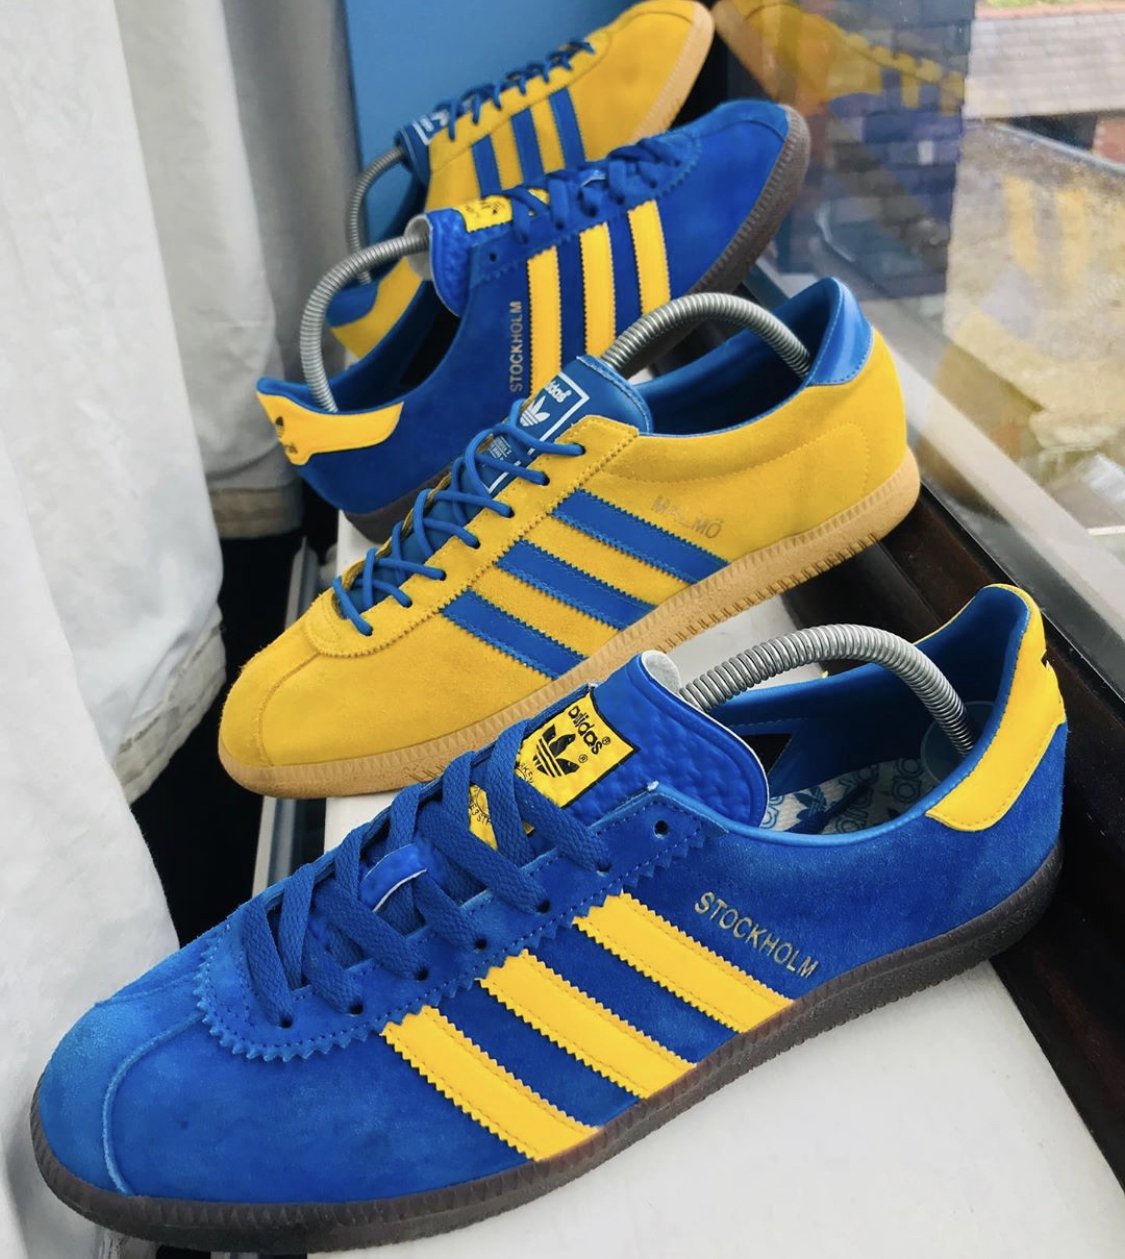 The Casuals Directory on Twitter: "Adidas Stockholm Malmo /// Pic Credit: @robxhough instagram https://t.co/36P80iOe3j" / Twitter